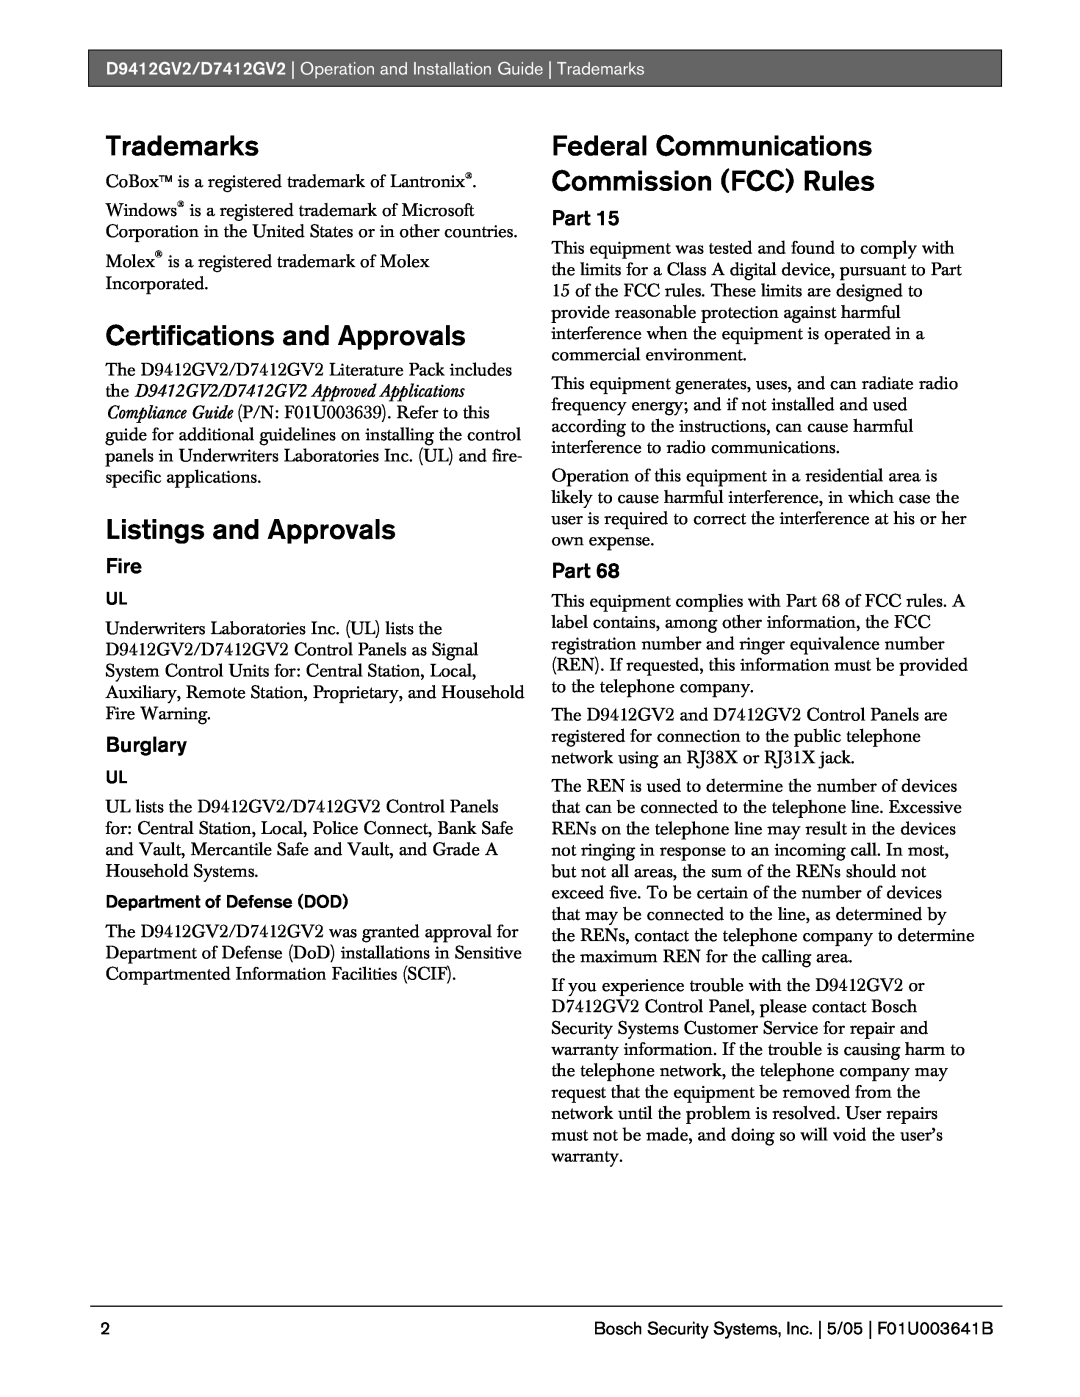 Bosch Appliances D9412GV2 manual Trademarks, Certifications and Approvals, Listings and Approvals, Fire, Burglary, Part 